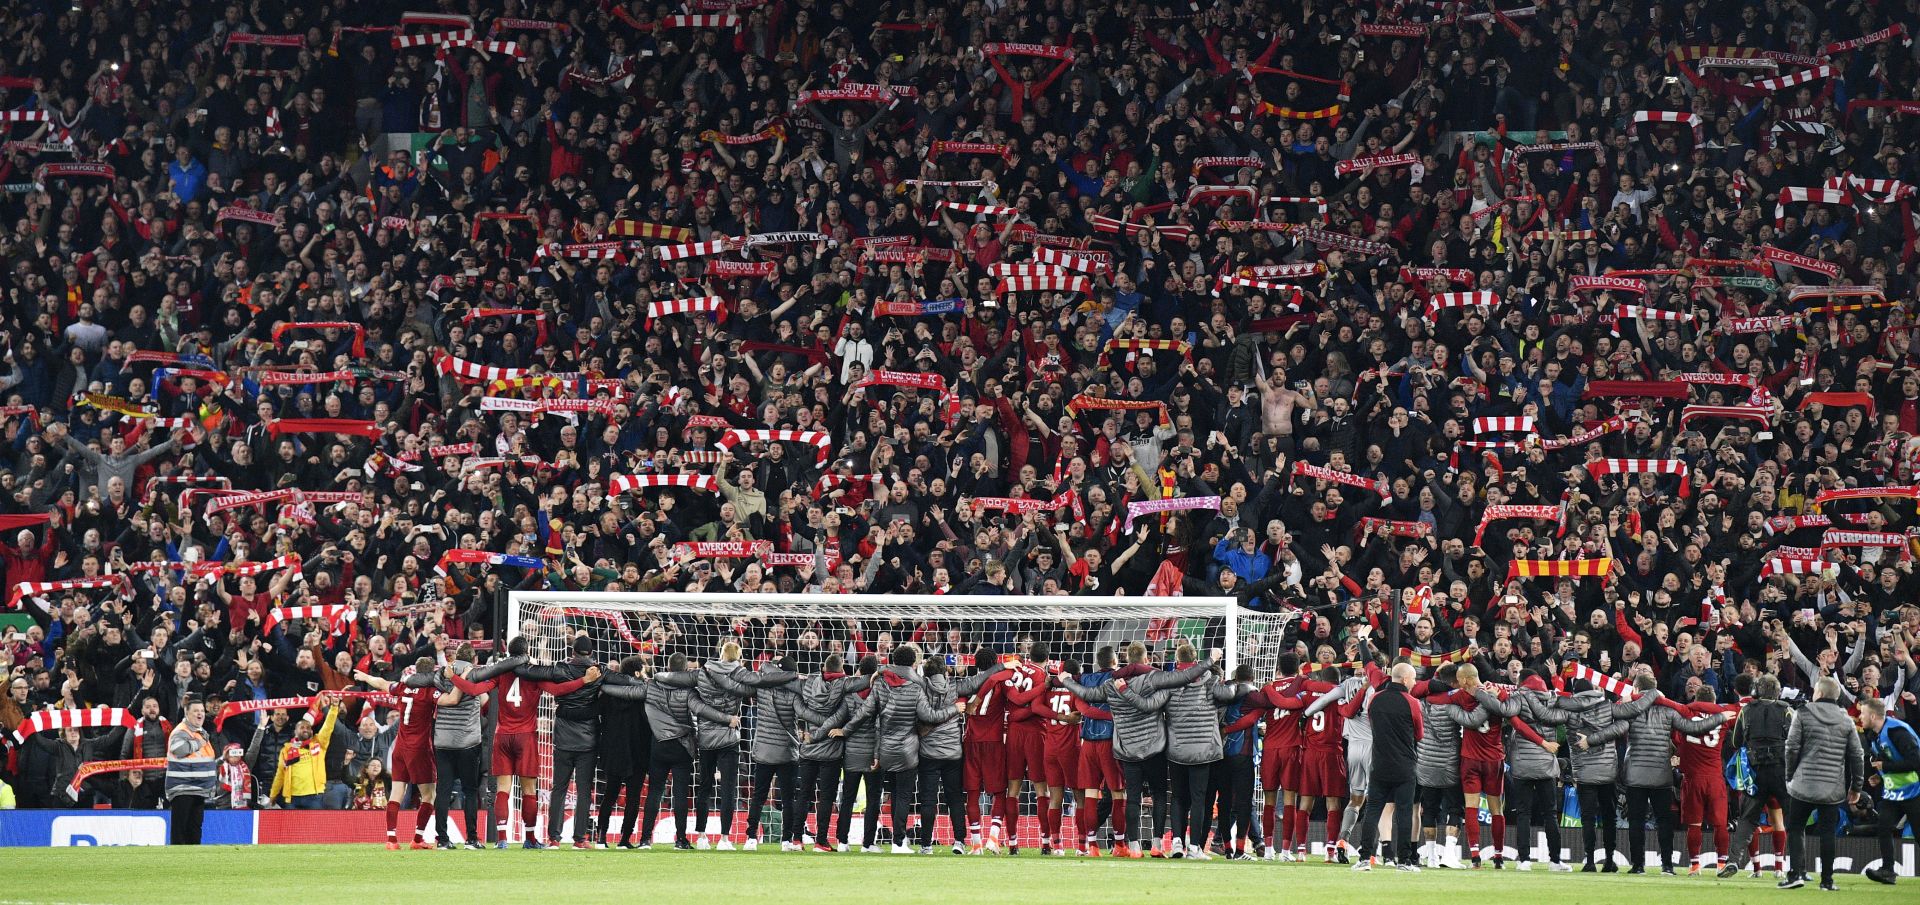 epa07554701 Liverpool players celebrate in front of their fans after the UEFA Champions League semi final 2nd leg match between Liverpool FC and FC Barcelona at Anfield, Liverpool, Britain, 07 May 2019. Liverpool won 4-0 and advance to the final.  EPA/NEIL HALL